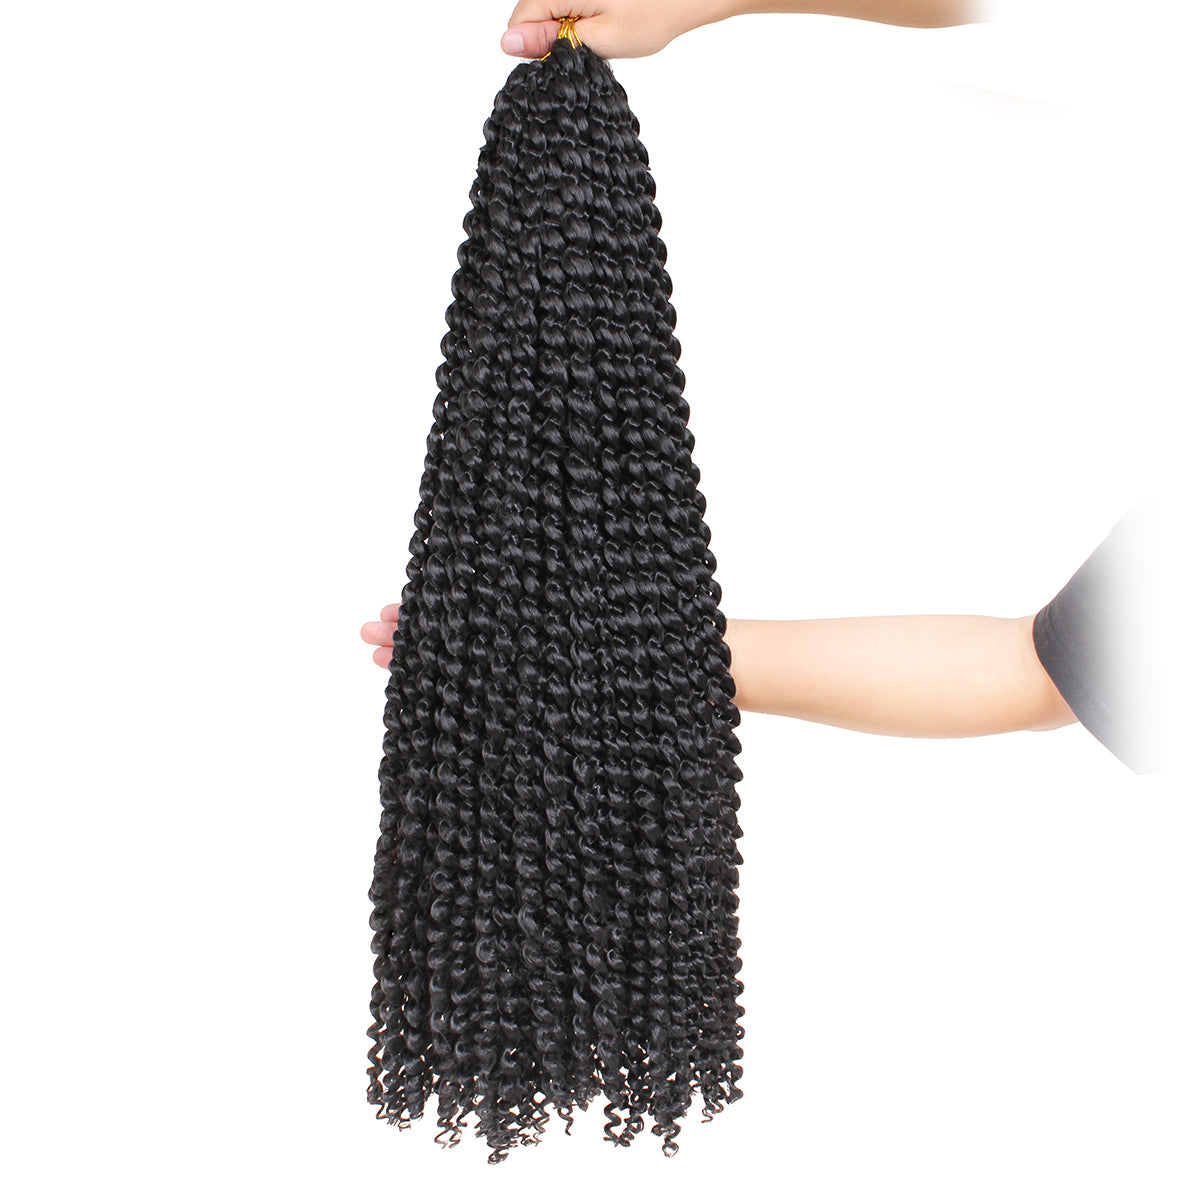 30Inch Long Passion Twist Hair Water Wave Synthetic Crochet Braids